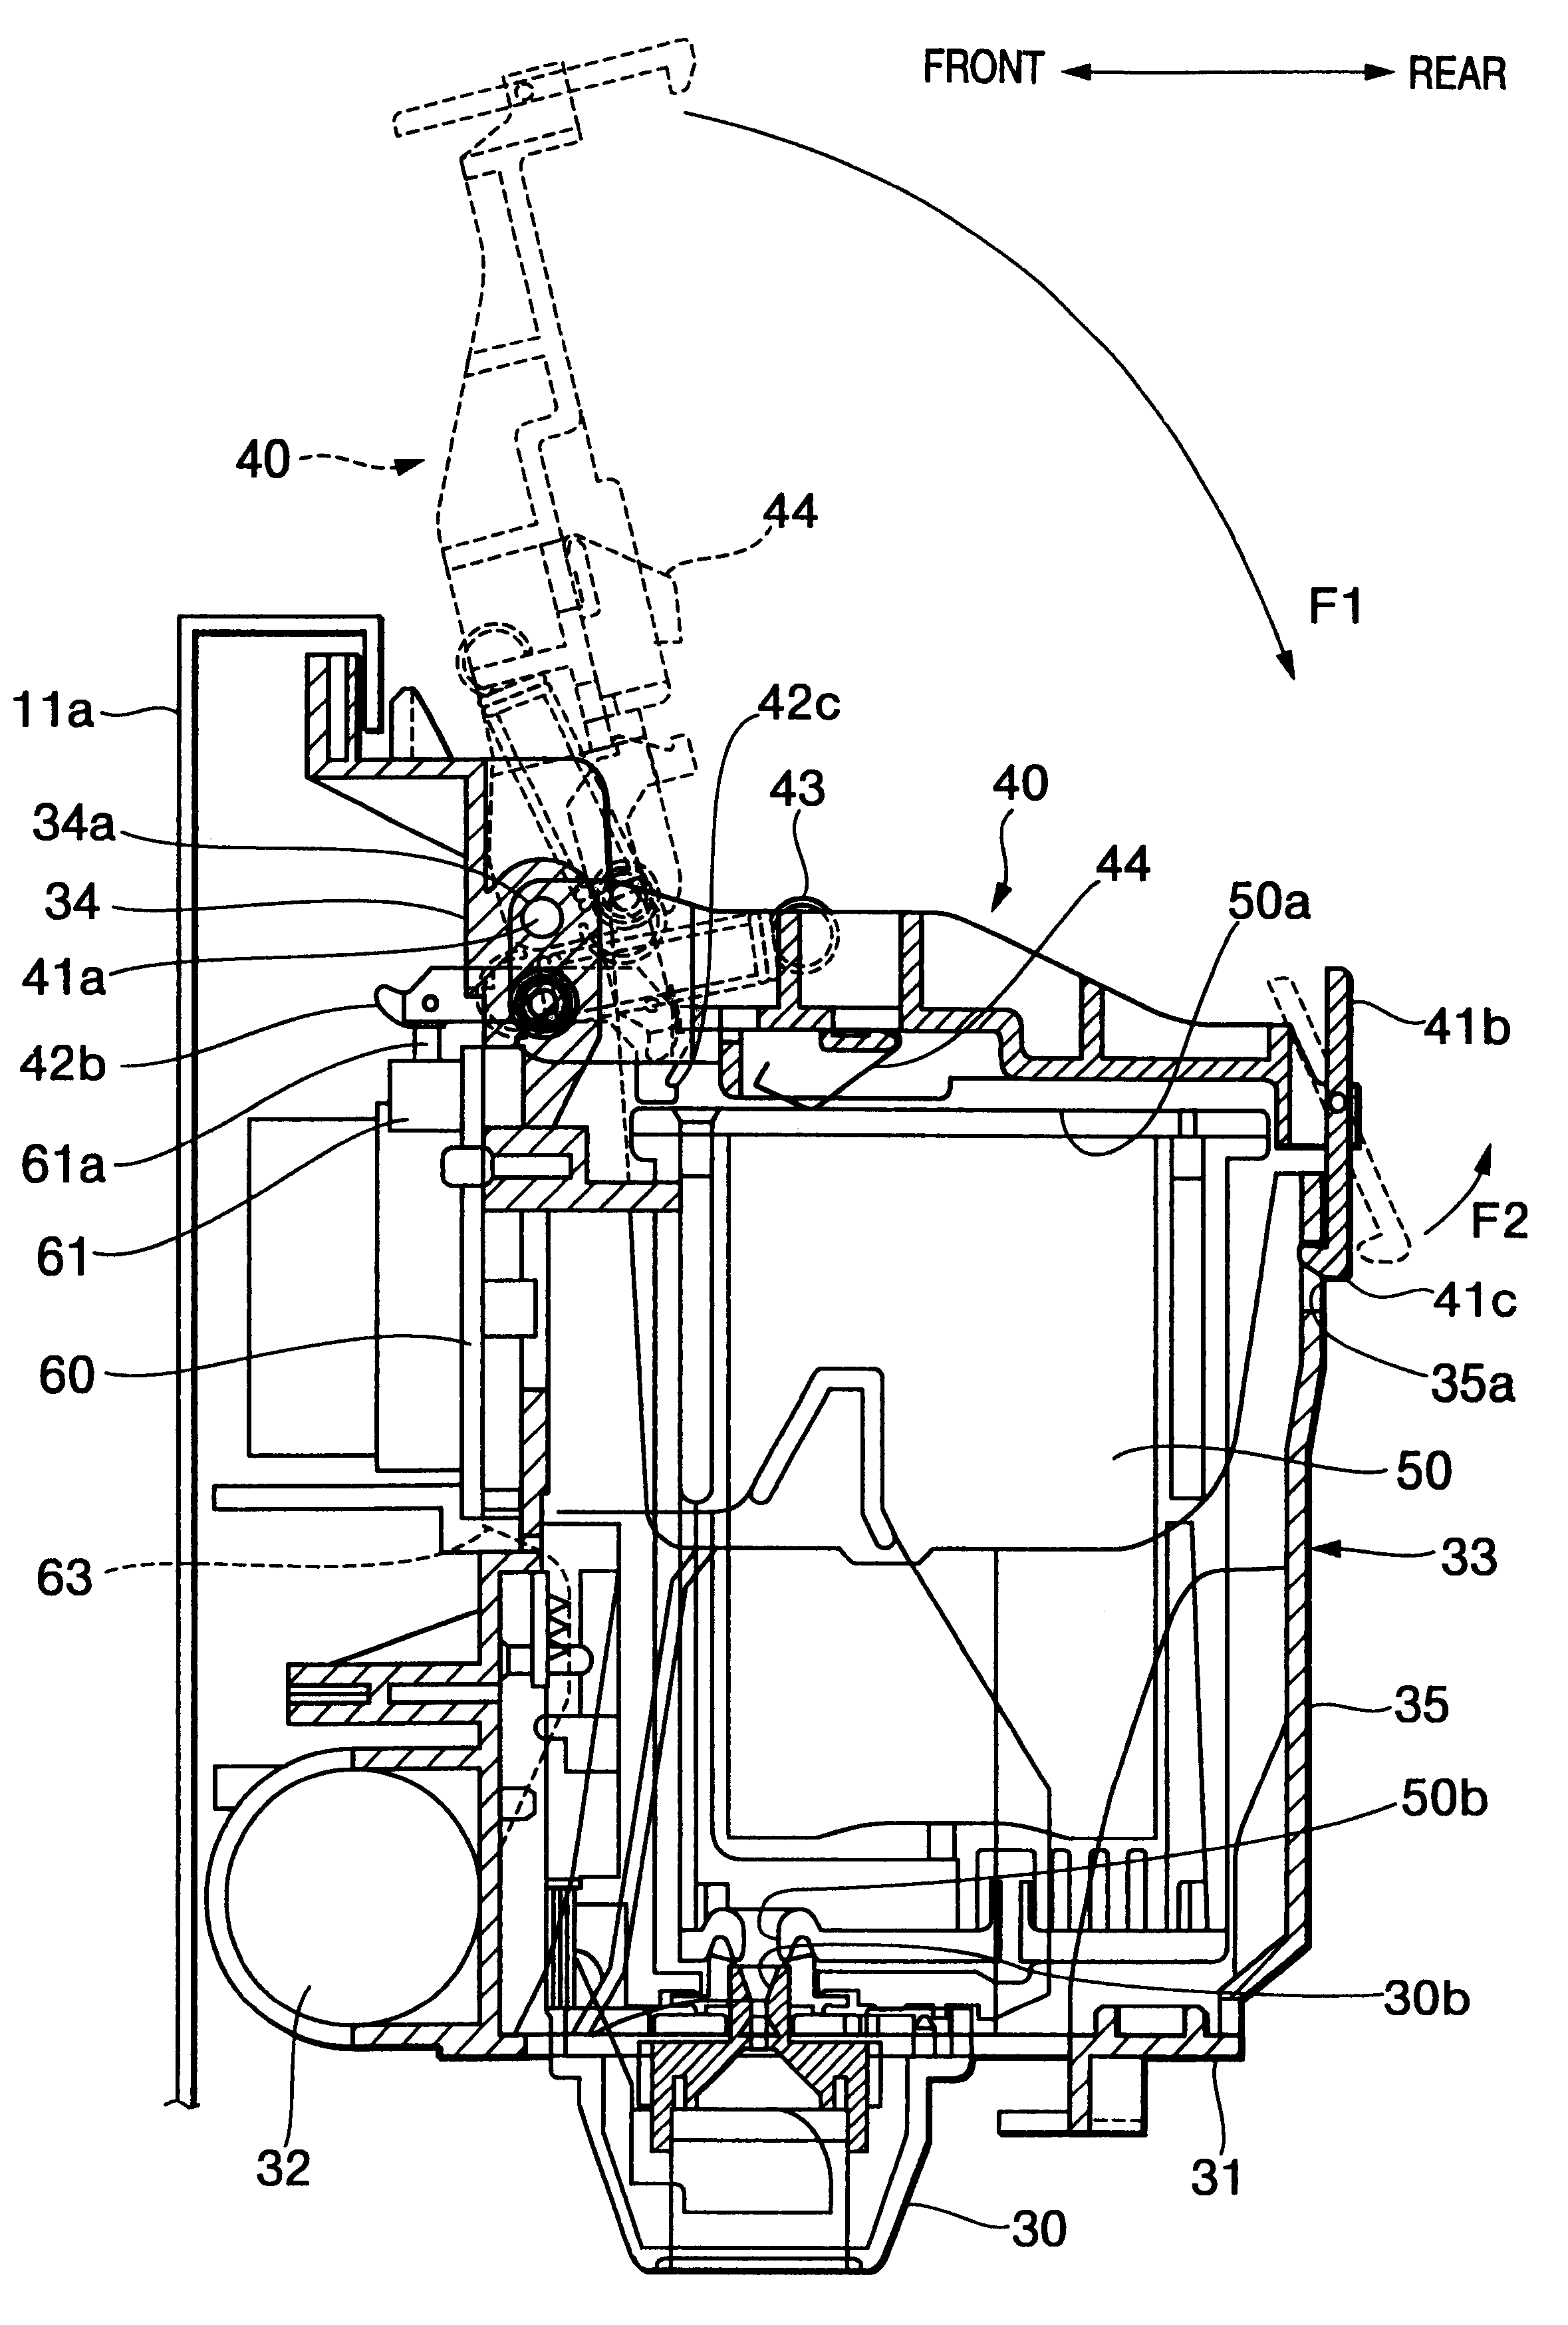 Printer carriage with configuration to insure proper detection of ink cartridge